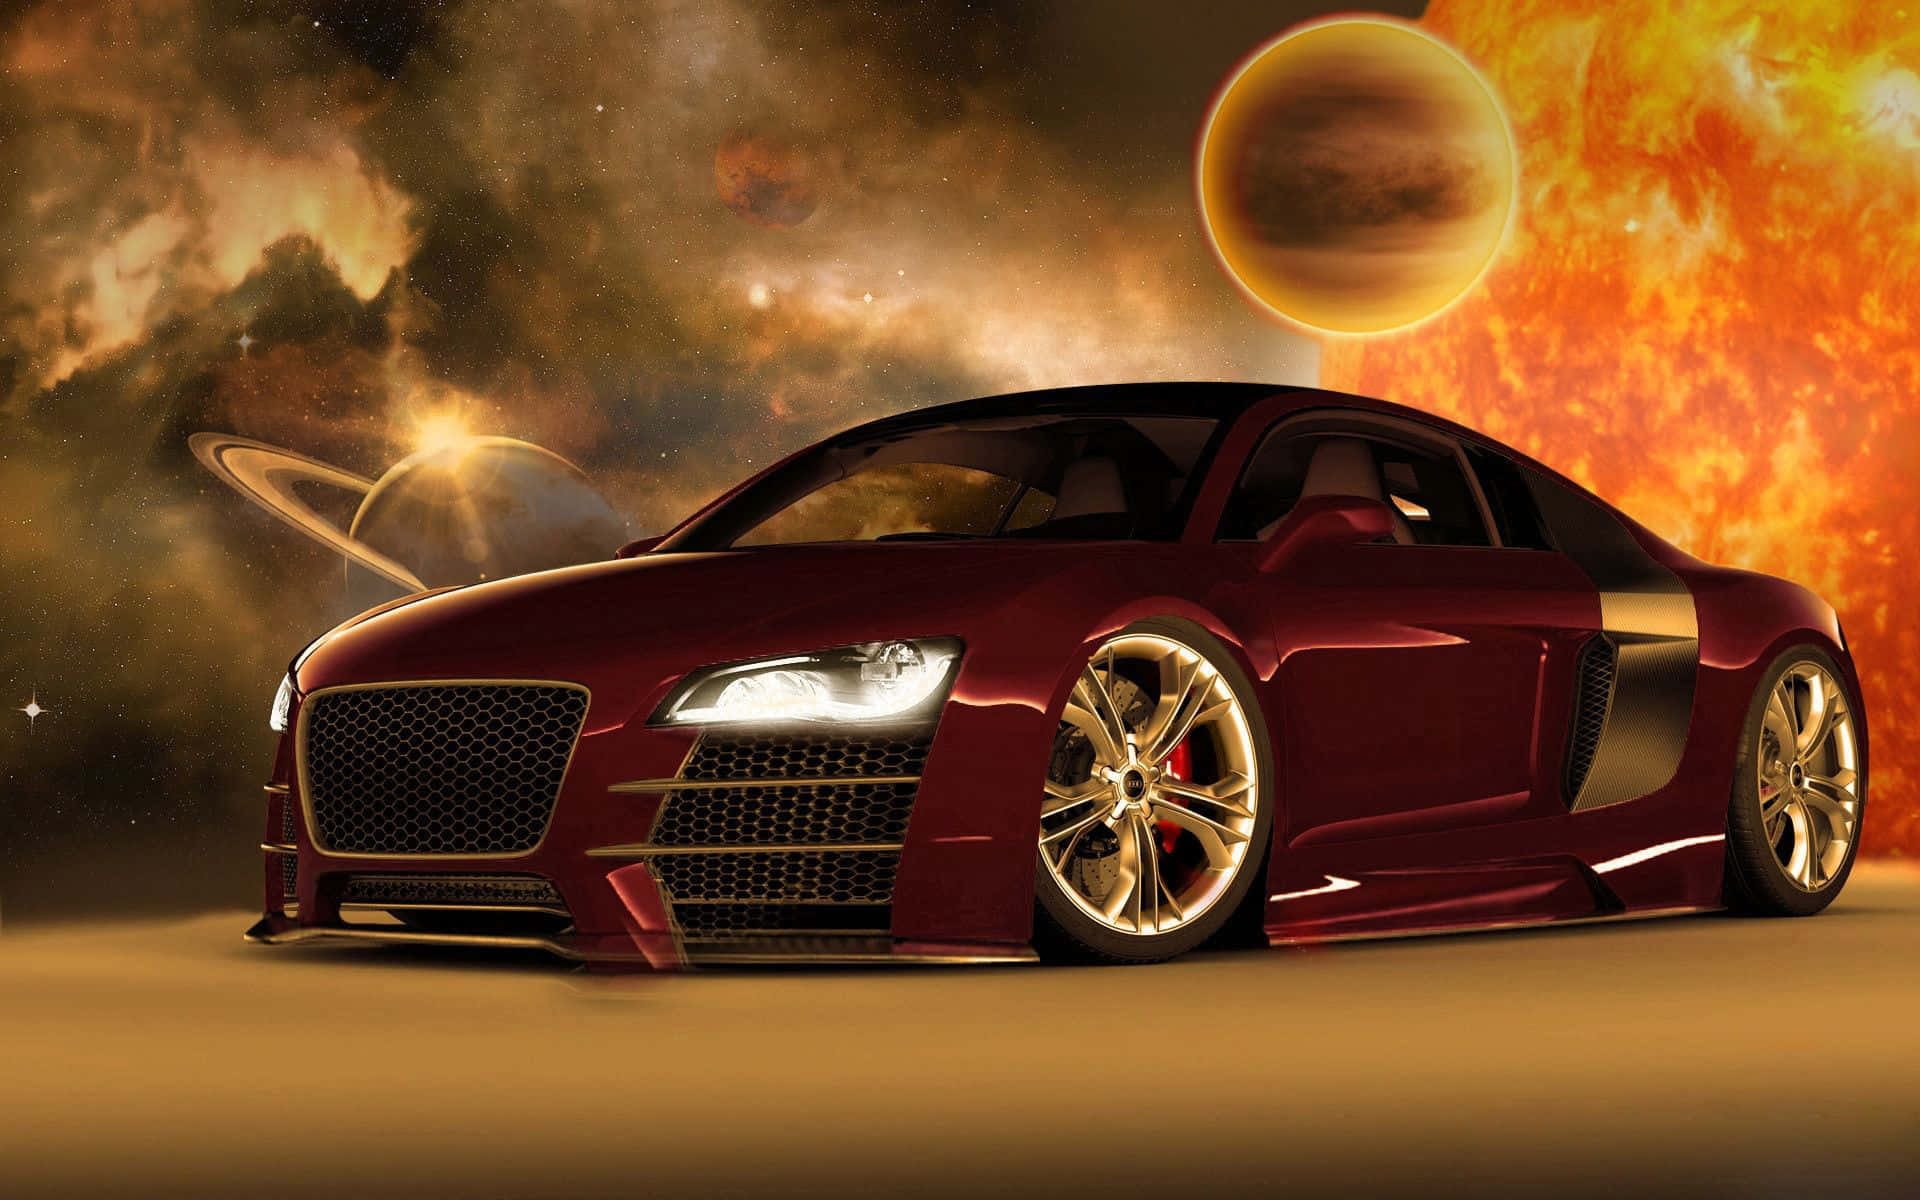 A Red Car In Space With A Planet In The Background